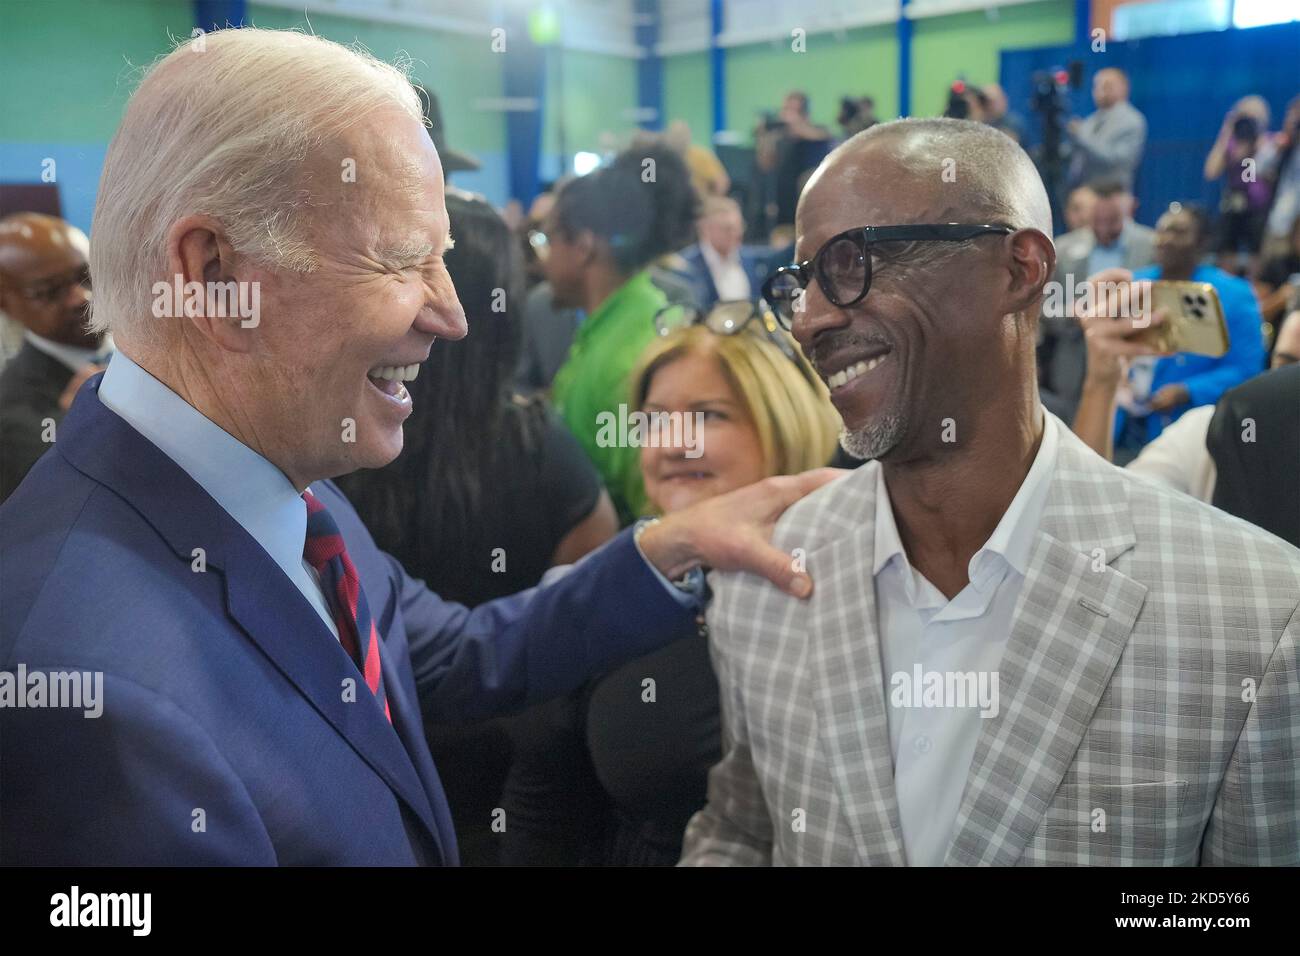 Hallandale Beach, United States. 05 November, 2022. U.S. President Joe Biden, greets an audience member after delivering remarks on Social Security, Medicare, and prescription drug costs during a stop at a community center, November 1, 2022, in Hallandale Beach, Florida.  Credit: Adam Schultz/White House Photo/Alamy Live News Stock Photo